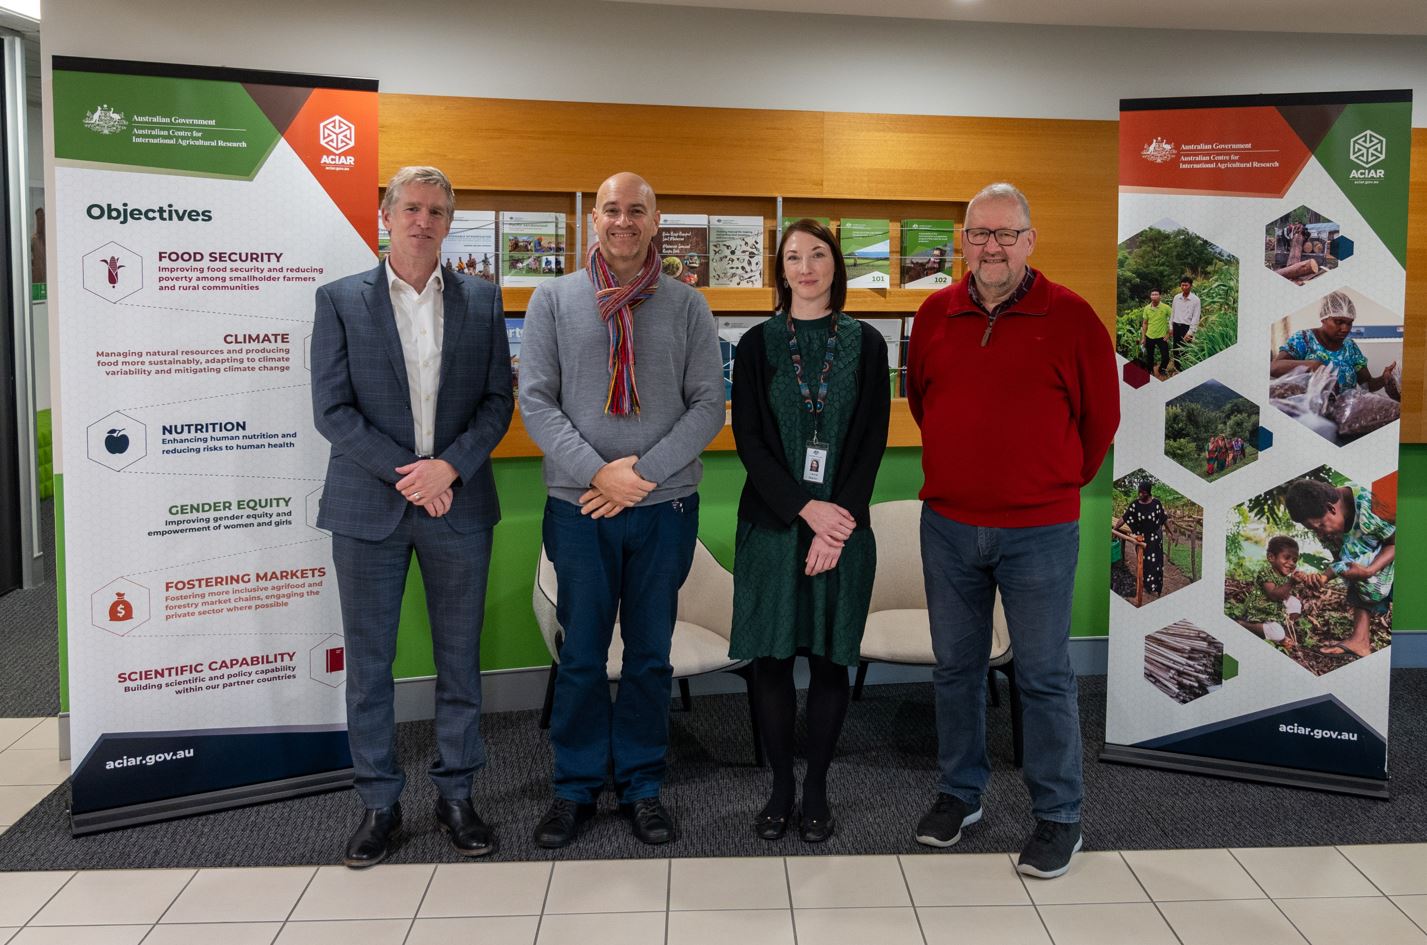 Project leader from UniSC, Professor Patrick Nunn (right) with ACIAR Research Program Manager, Water, Dr Neil Lazarow (centre left) with Lincoln University's Professor Tim Smith (left) and ACIAR Research Program Support Officer, Water, Laura Martin (centre right) at ACIAR House in Canberra.